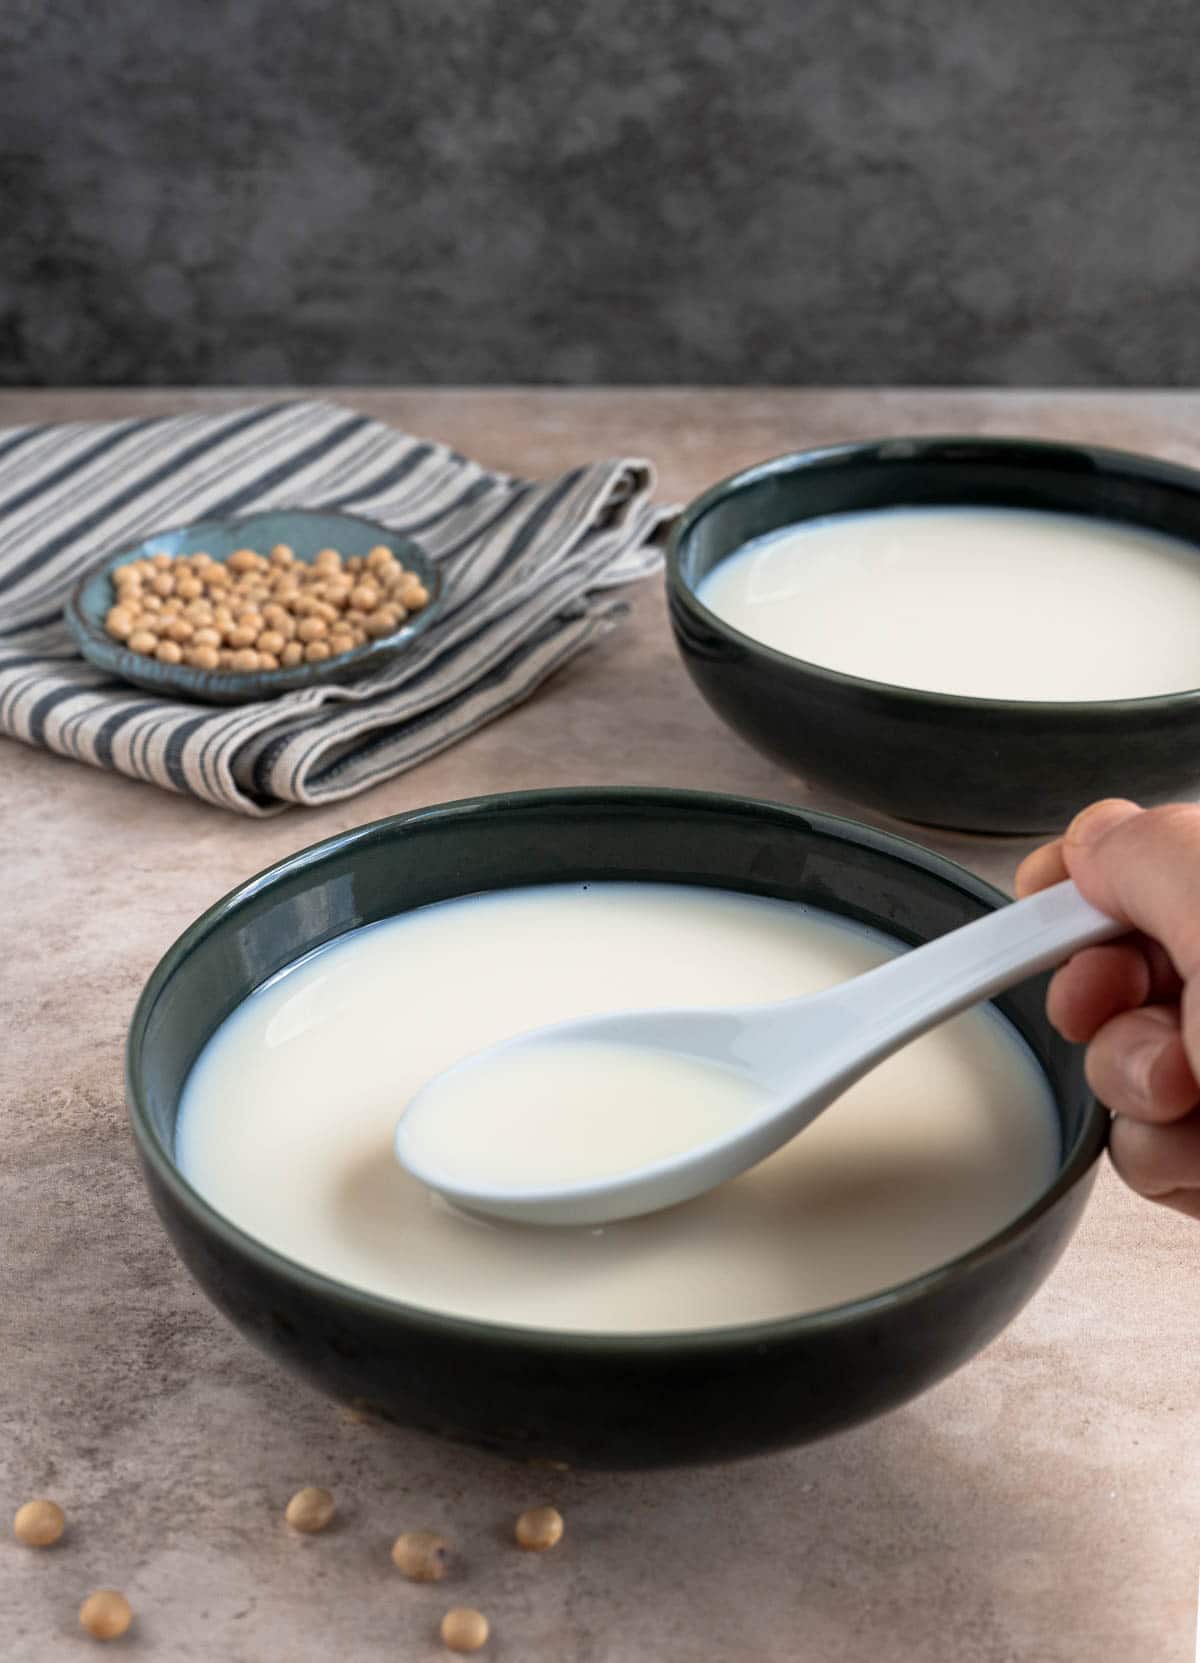 Scoop up soy milk with a white spoon.